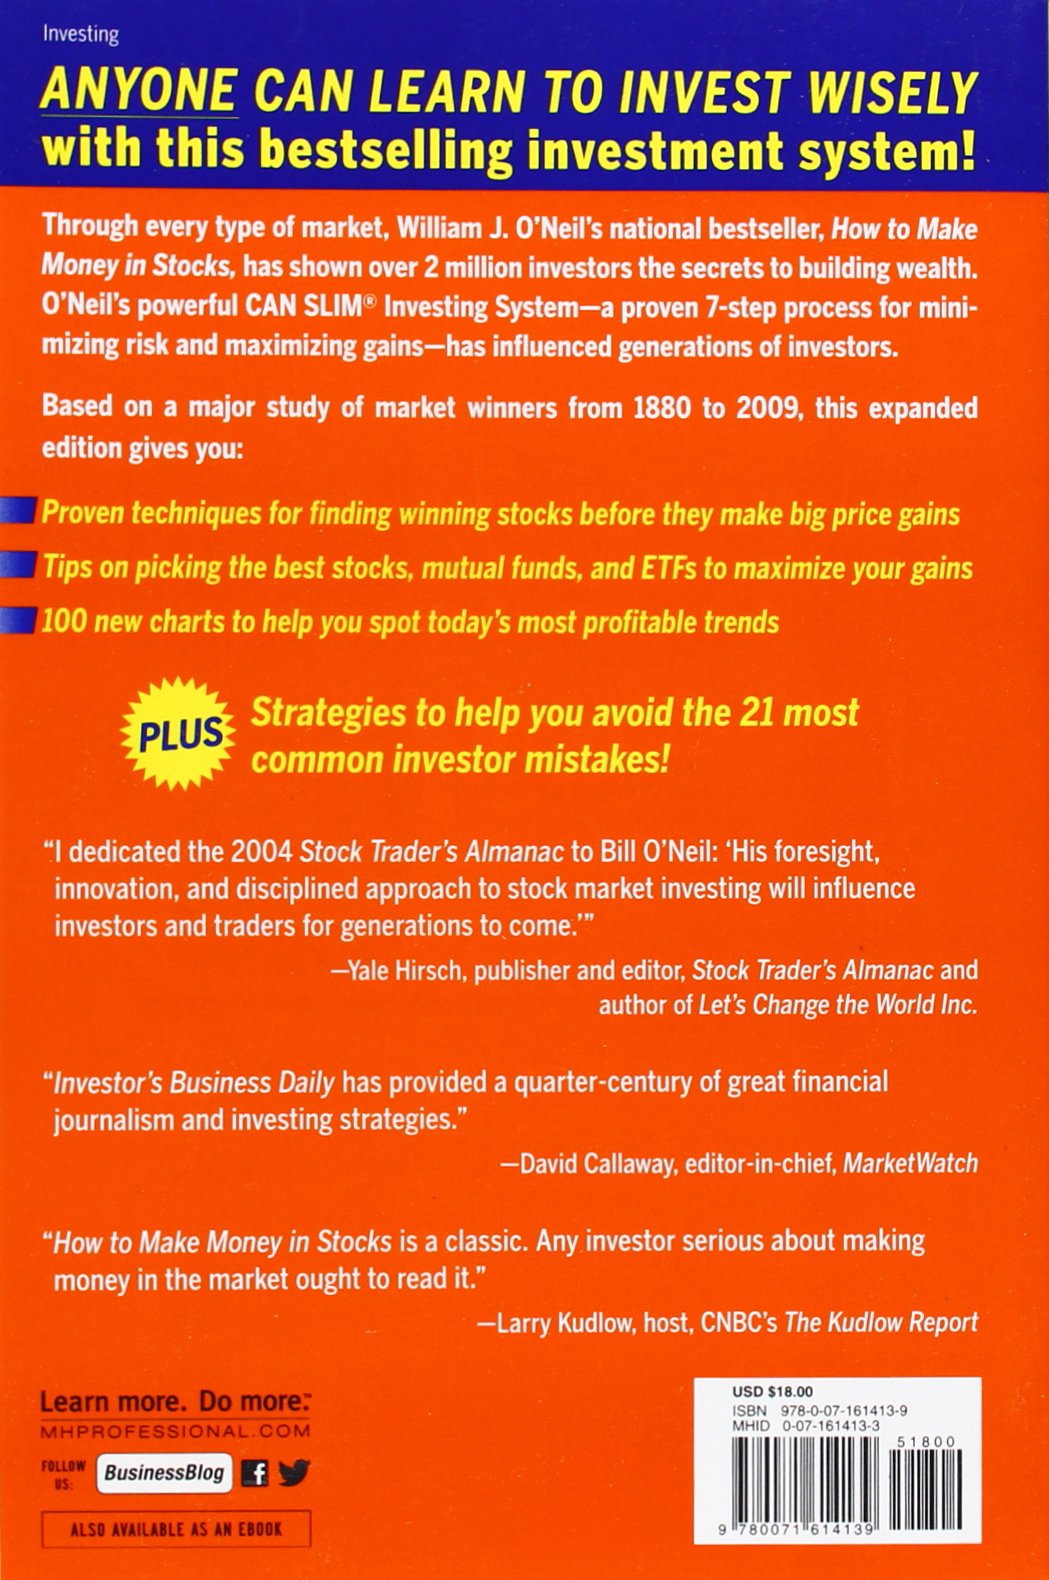 How to Make Money in Stocks: A Winning System in Good Times and Bad, Fourth Edition